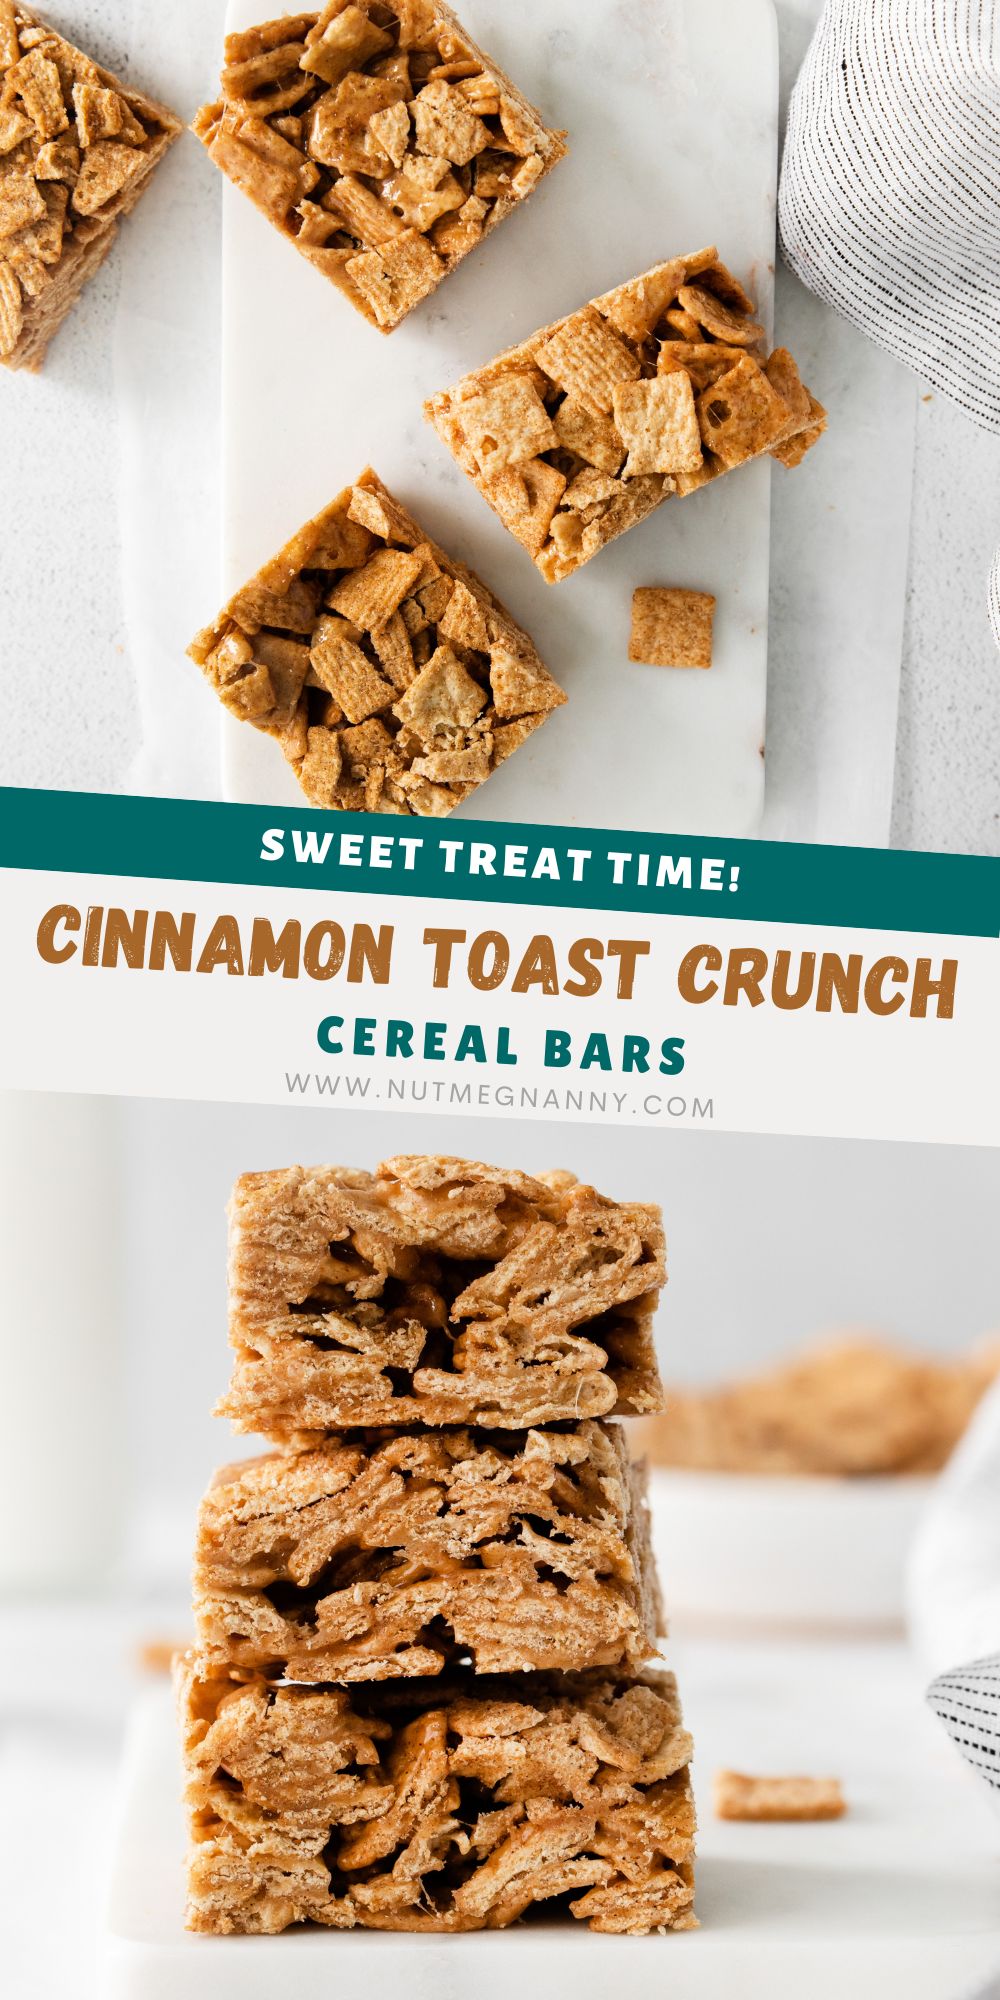 Cinnamon Toast Crunch Cereal Bars pin for Pinterest.